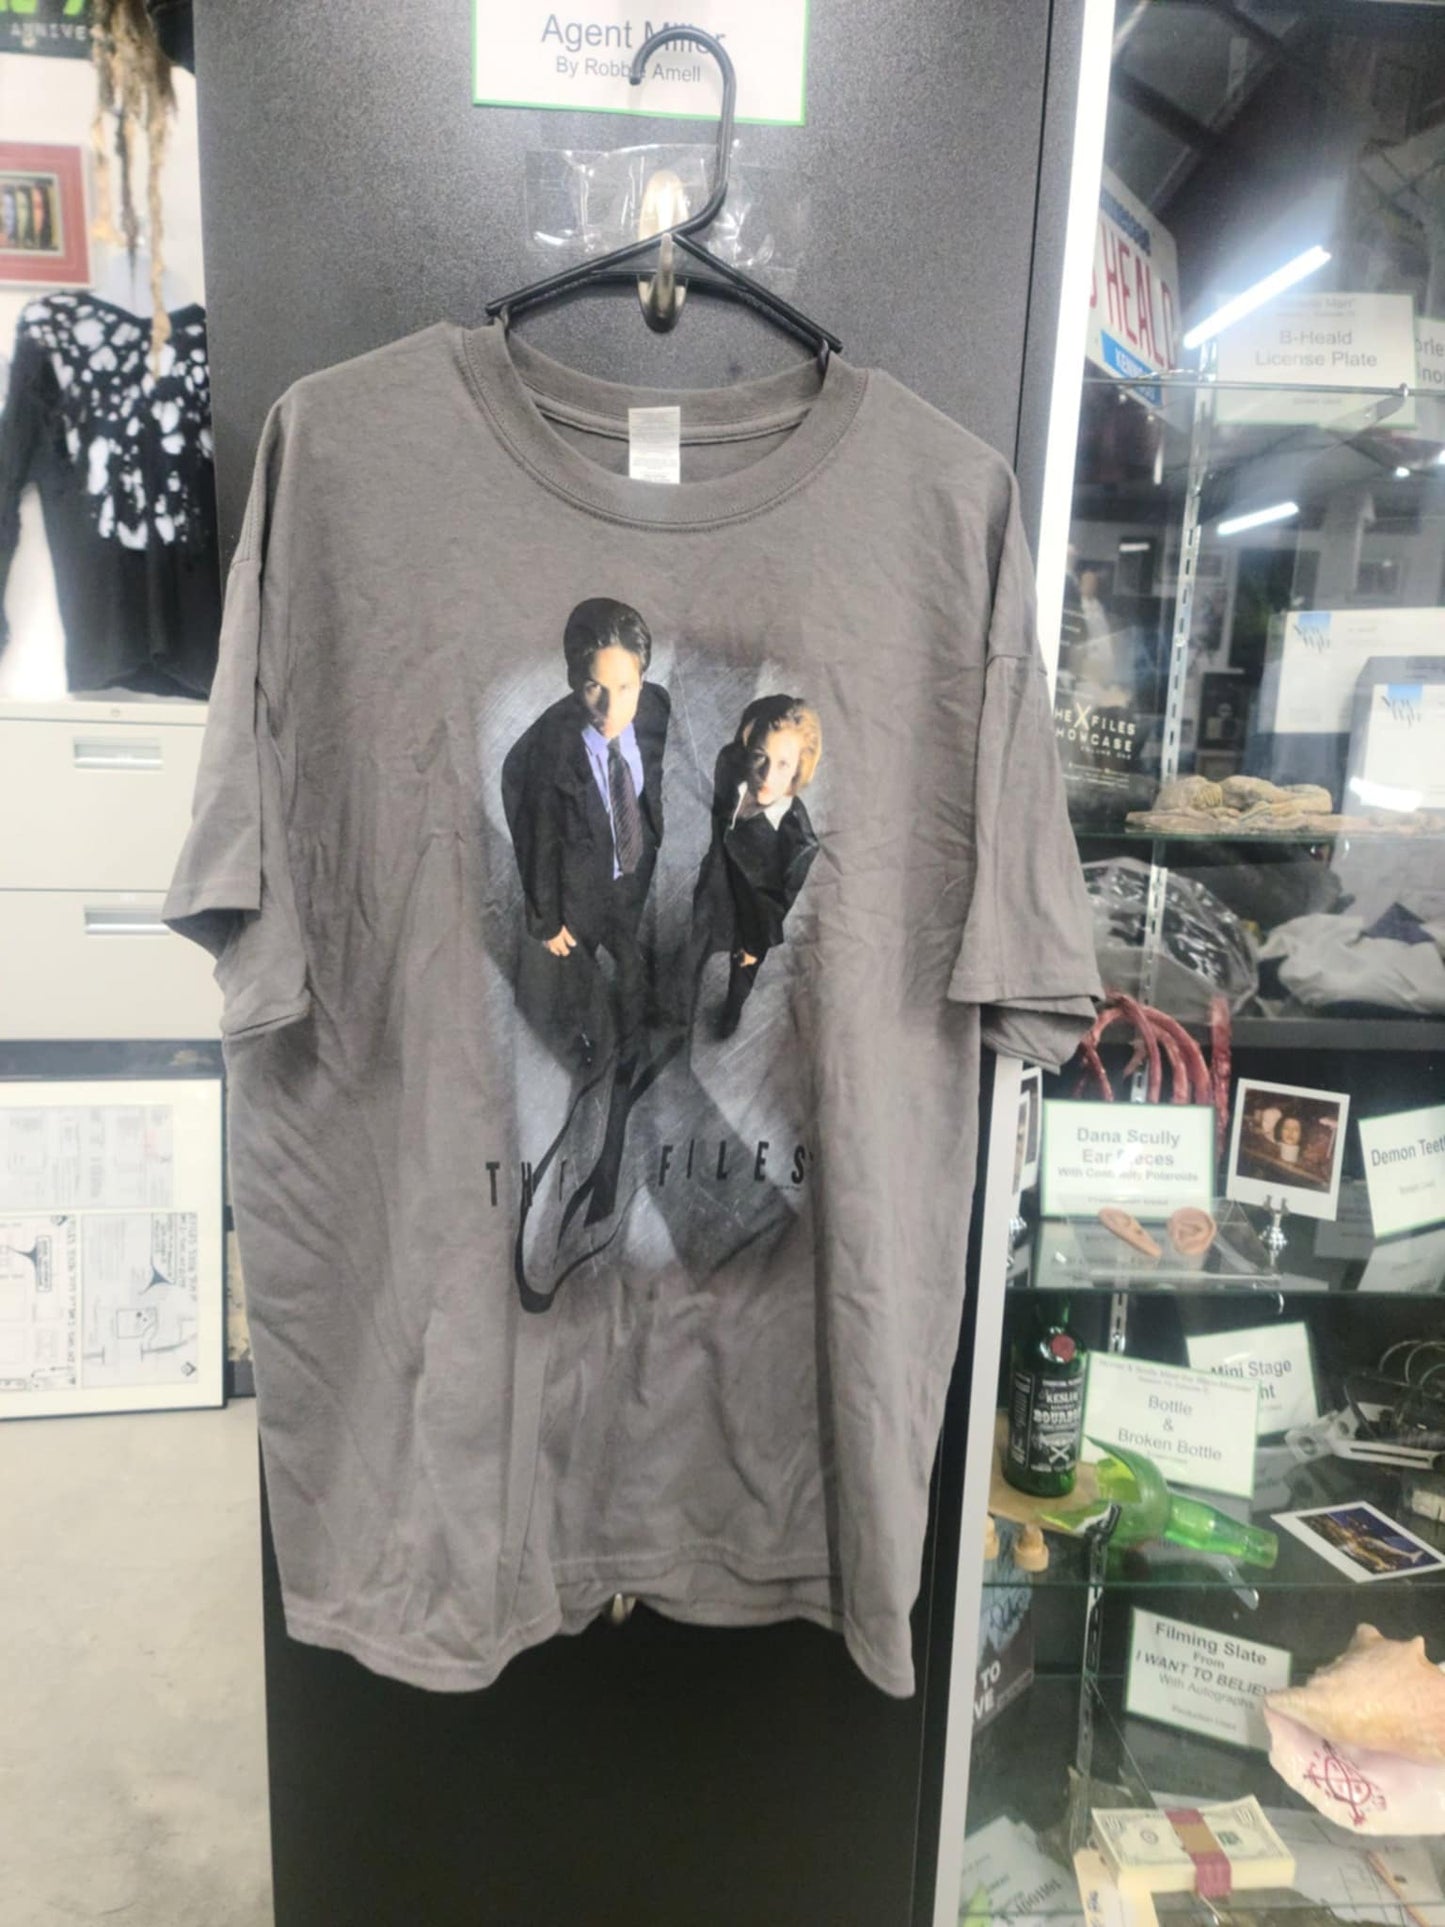 X-Files Shirt -Mulder and Scully